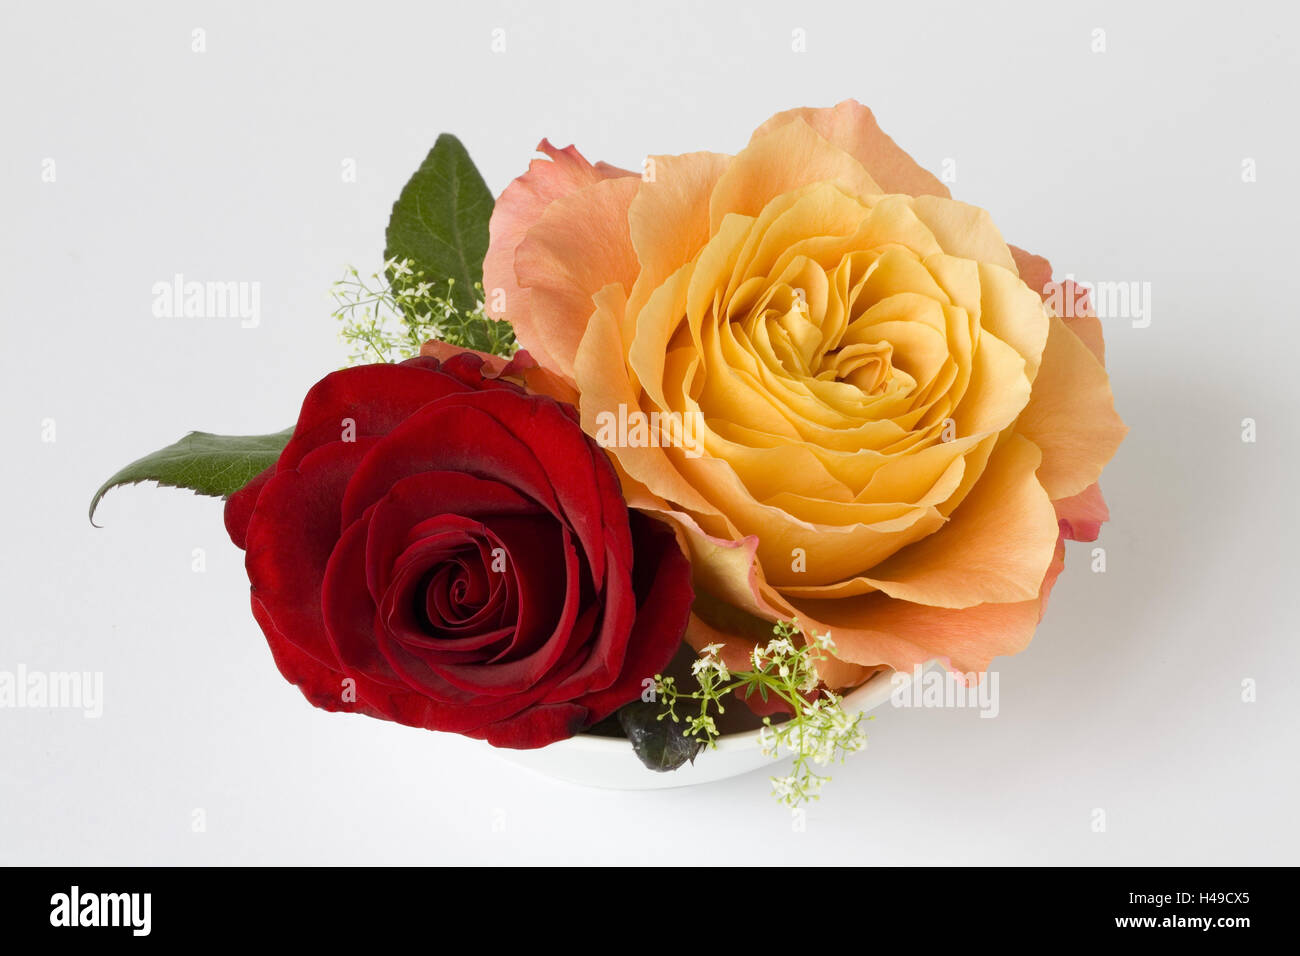 orange and red rose in white dished plate, Stock Photo